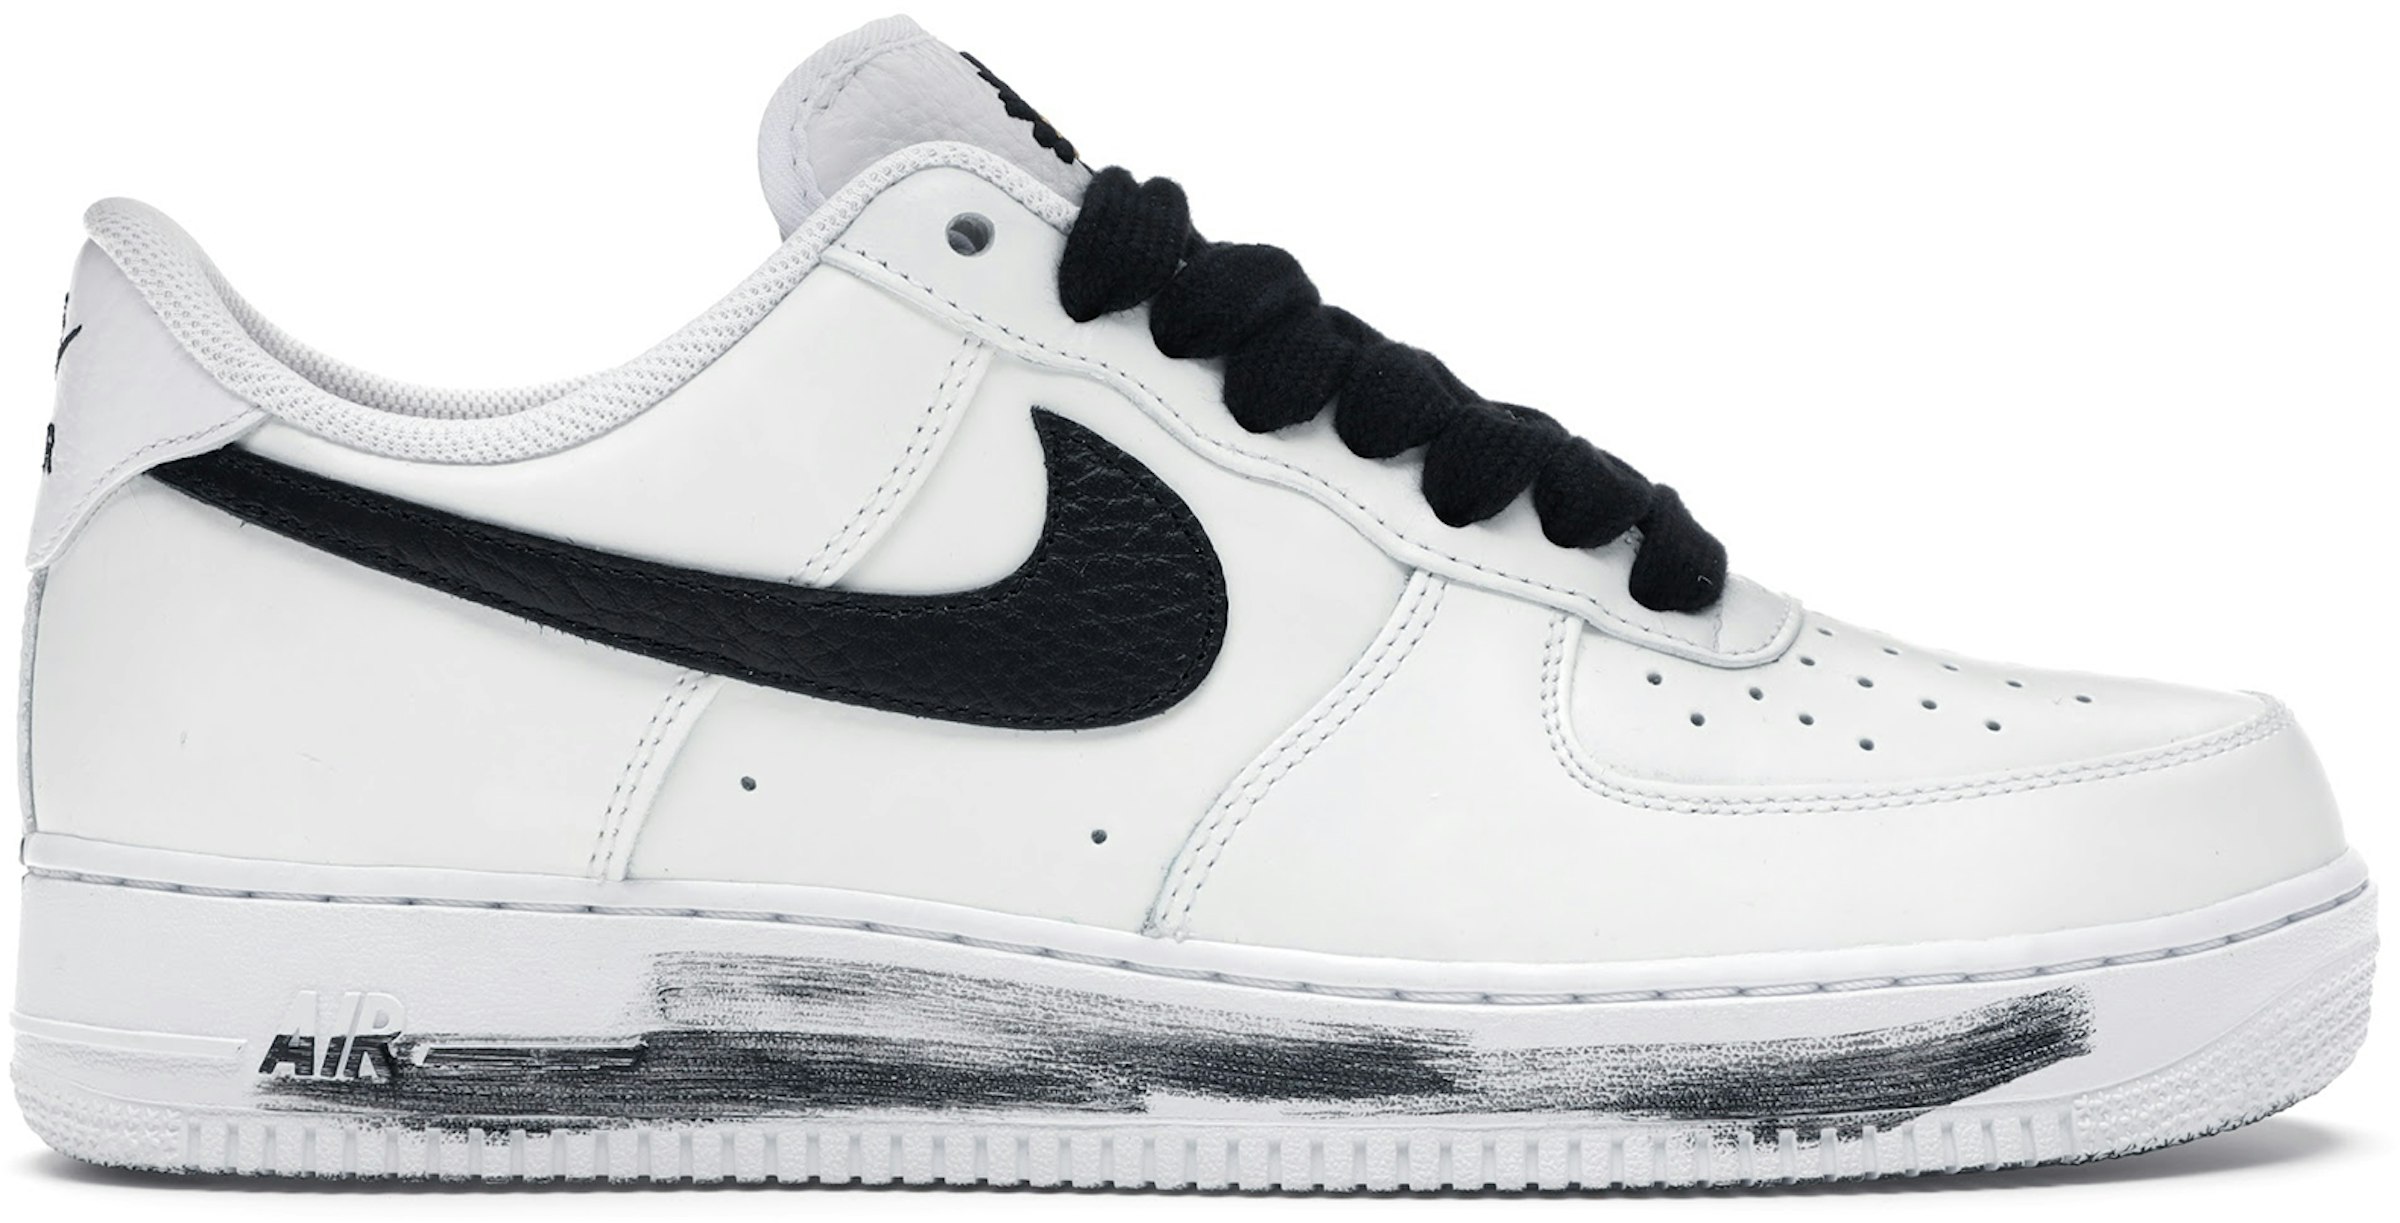 inestable conocido playa Nike Air Force 1 Low G-Dragon Peaceminusone Para-Noise 2.0 Men's -  DD3223-100 - US